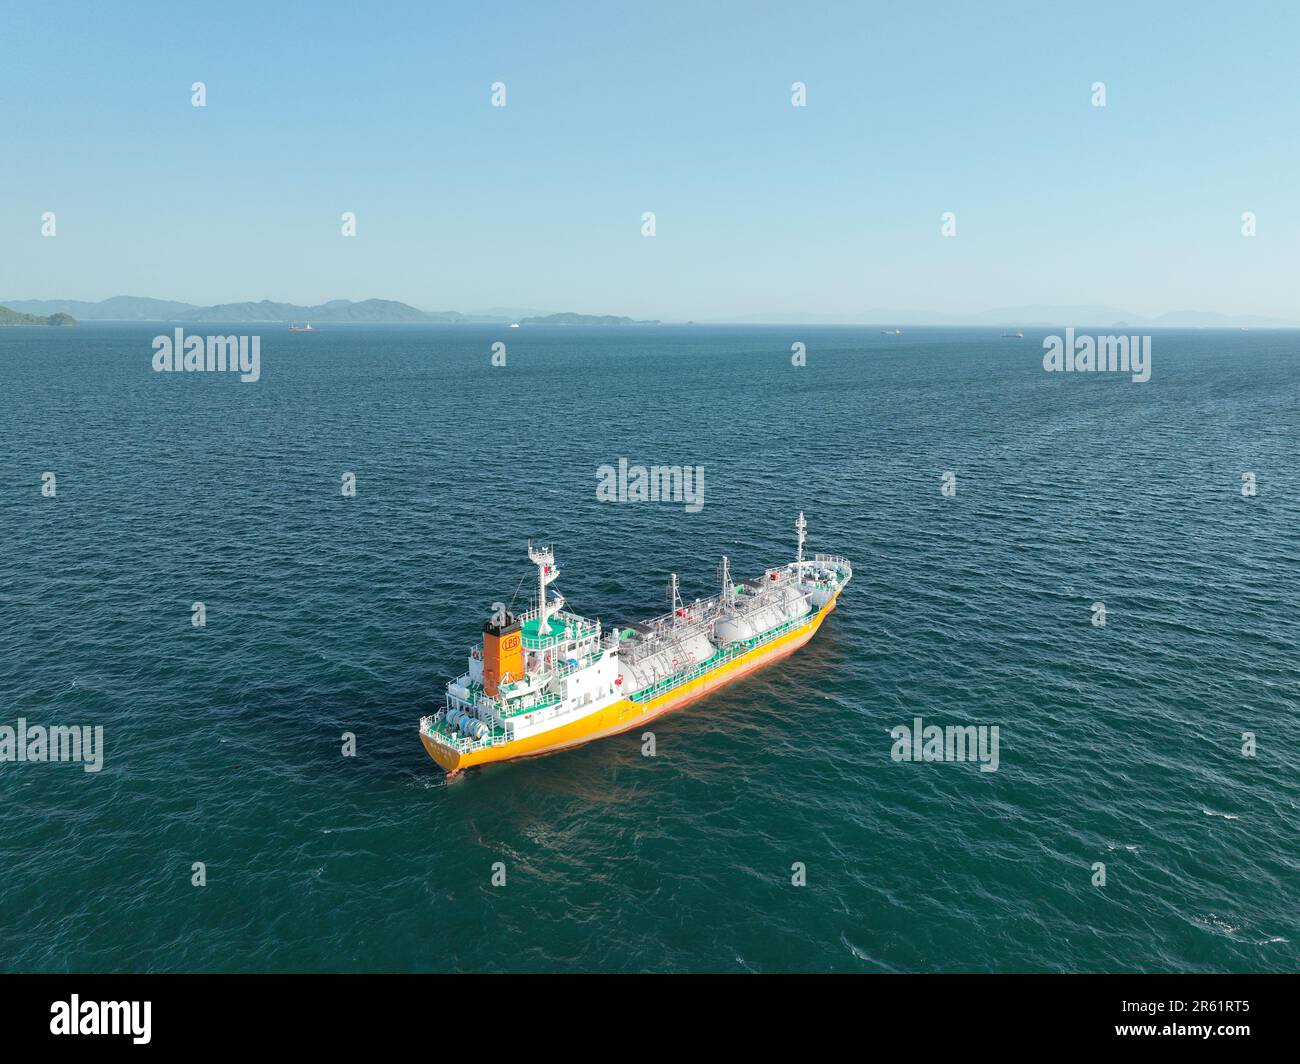 An aerial view of a boat sailing in Seto Inland Sea, Japan Stock Photo